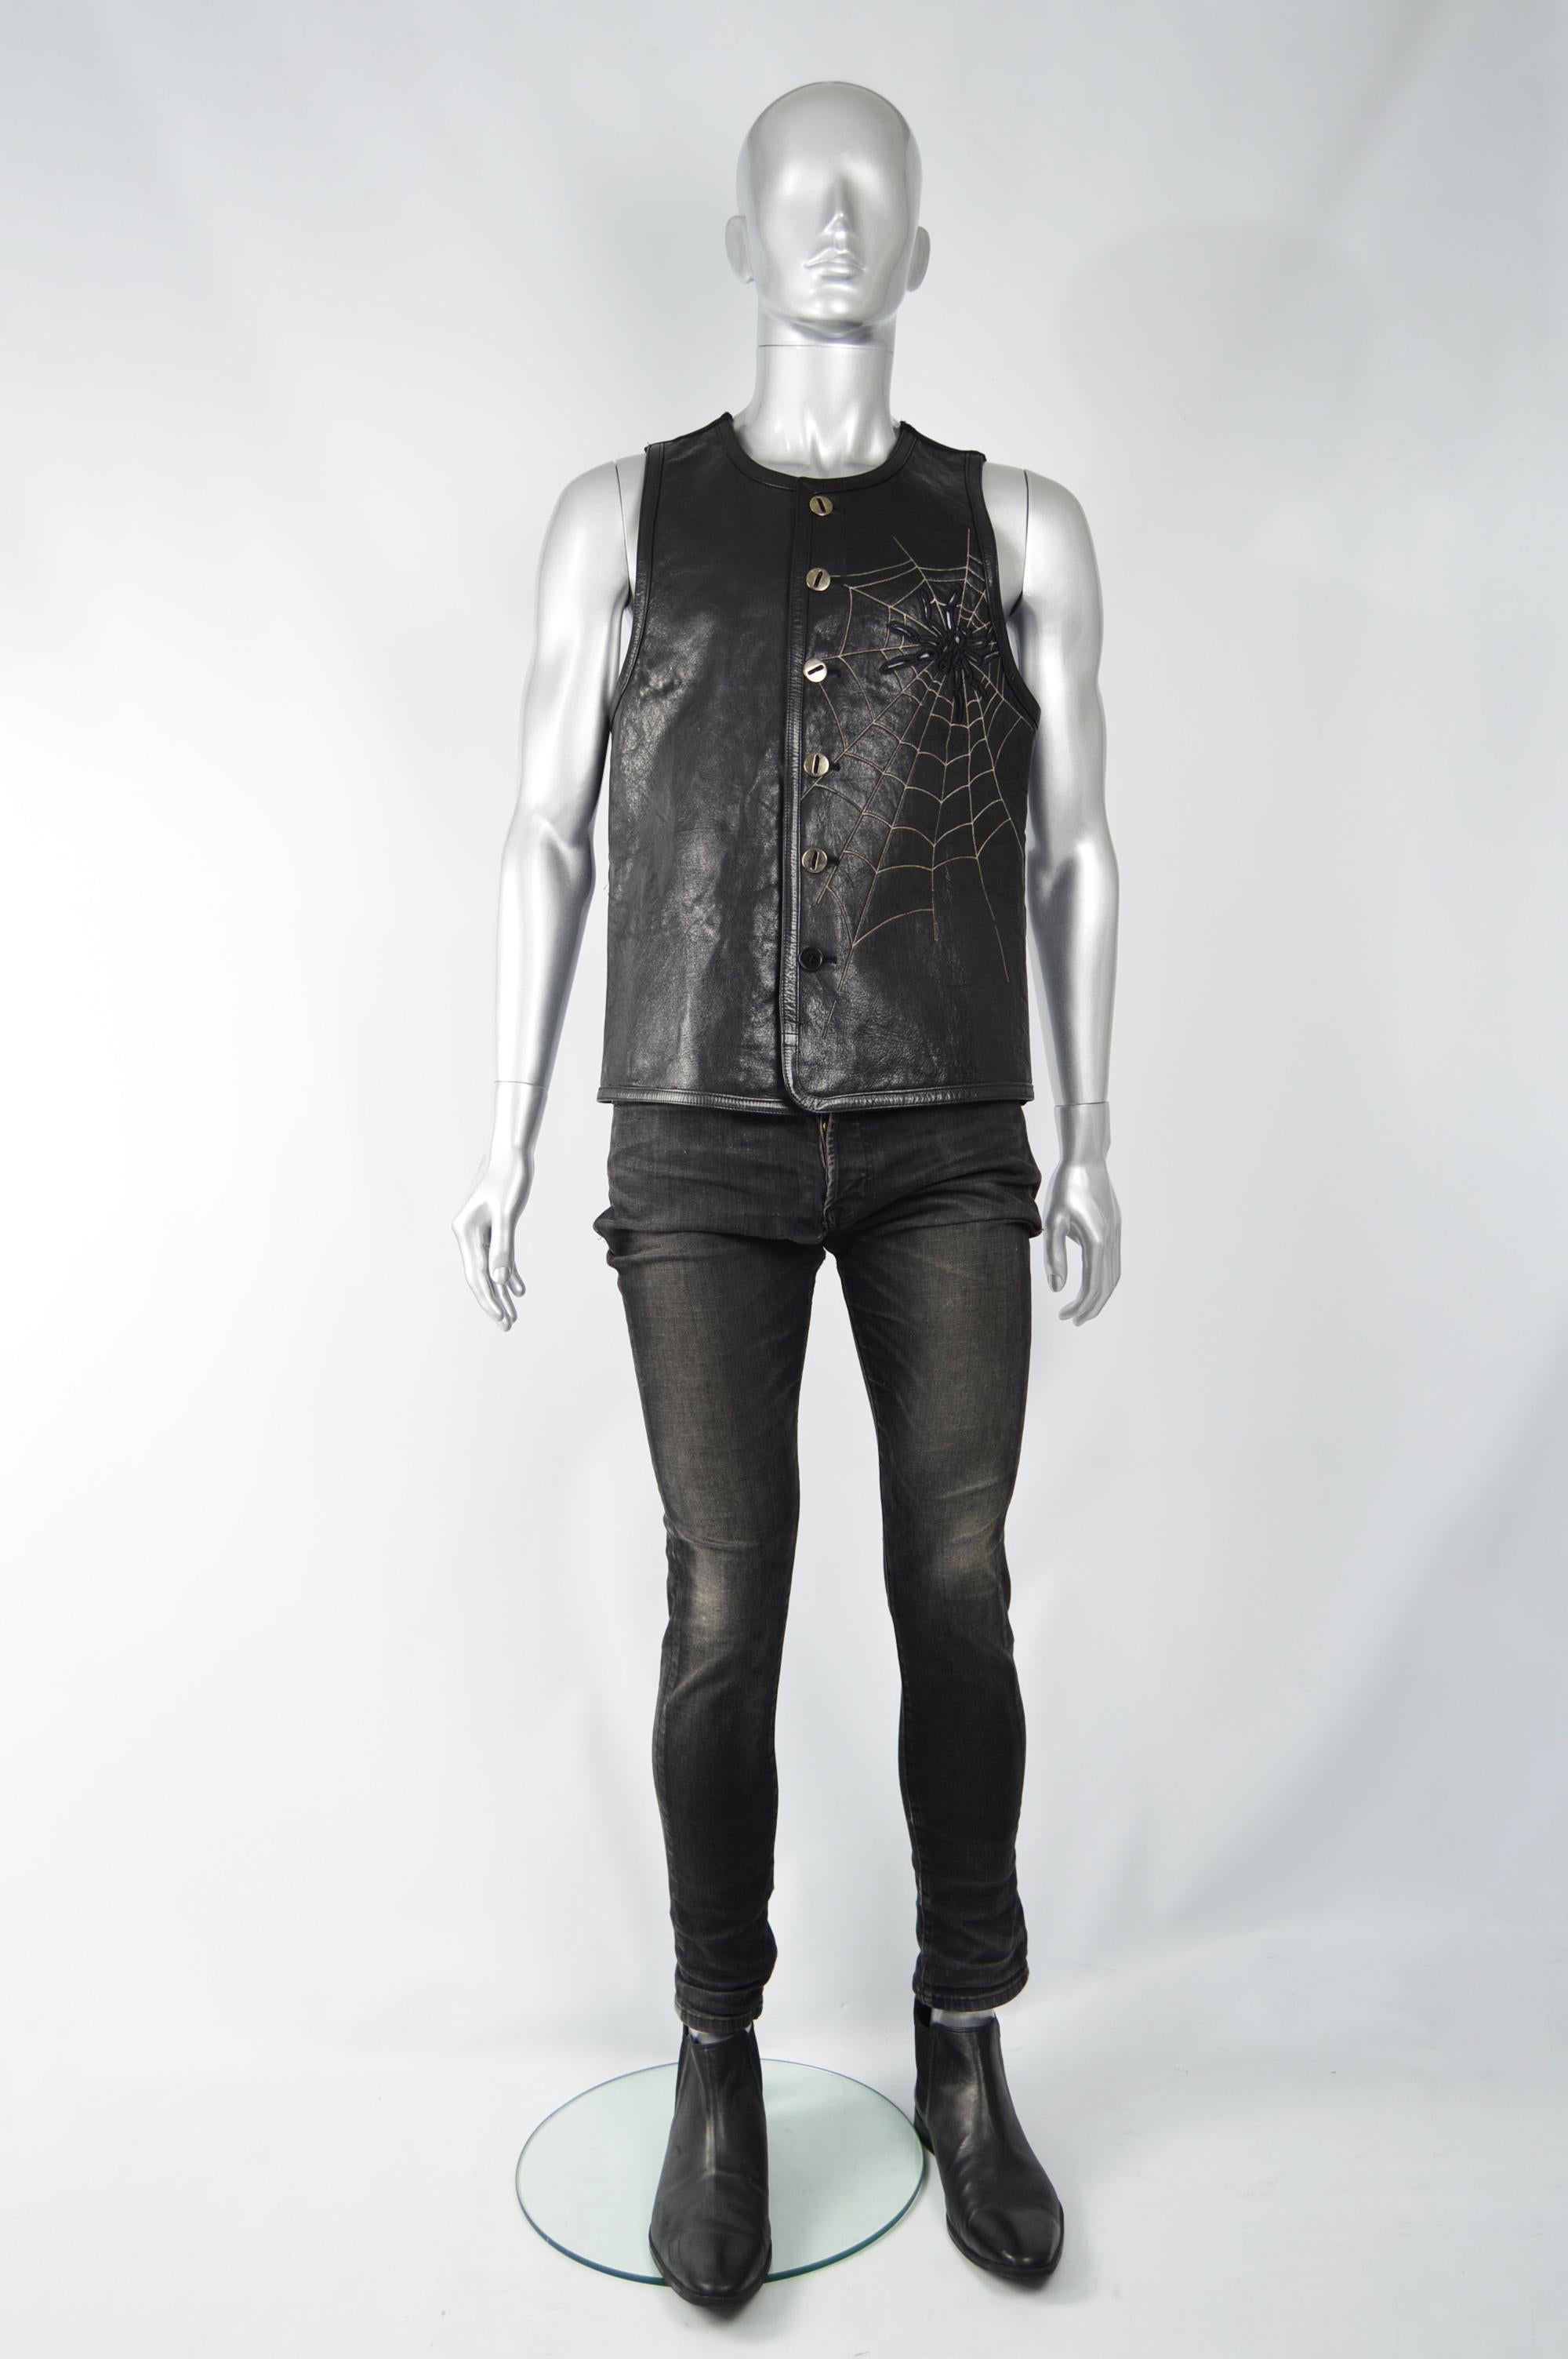 An incredible vintage mens leather vest / waistcoat from the 80s by genius Italian fashion designer duo, Calugi e Giannelli. In a black Italian leather with silver lurex embroidery creating a web and an embroidered and cut out spider design. 

Size: